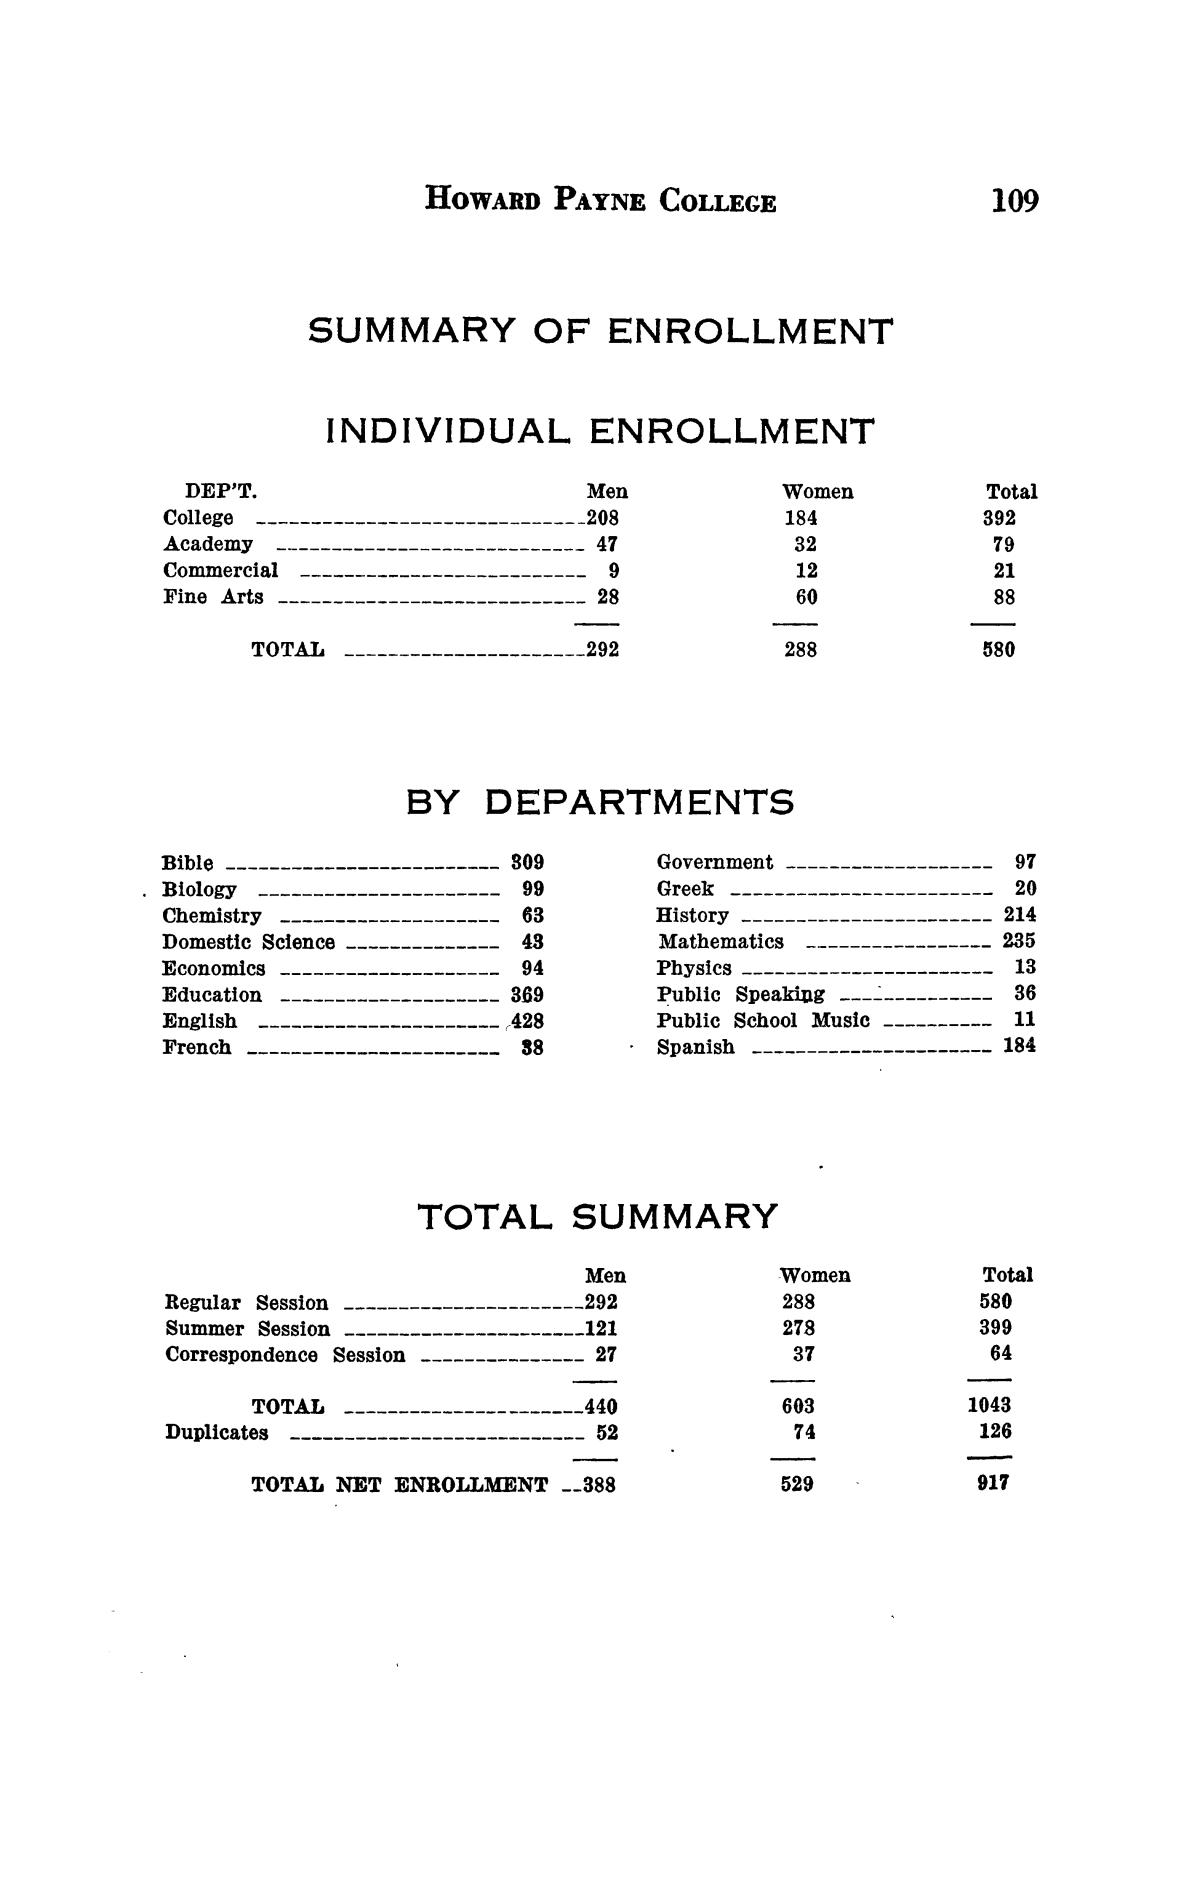 Catalogue of Howard Payne College, 1925-1926
                                                
                                                    109
                                                